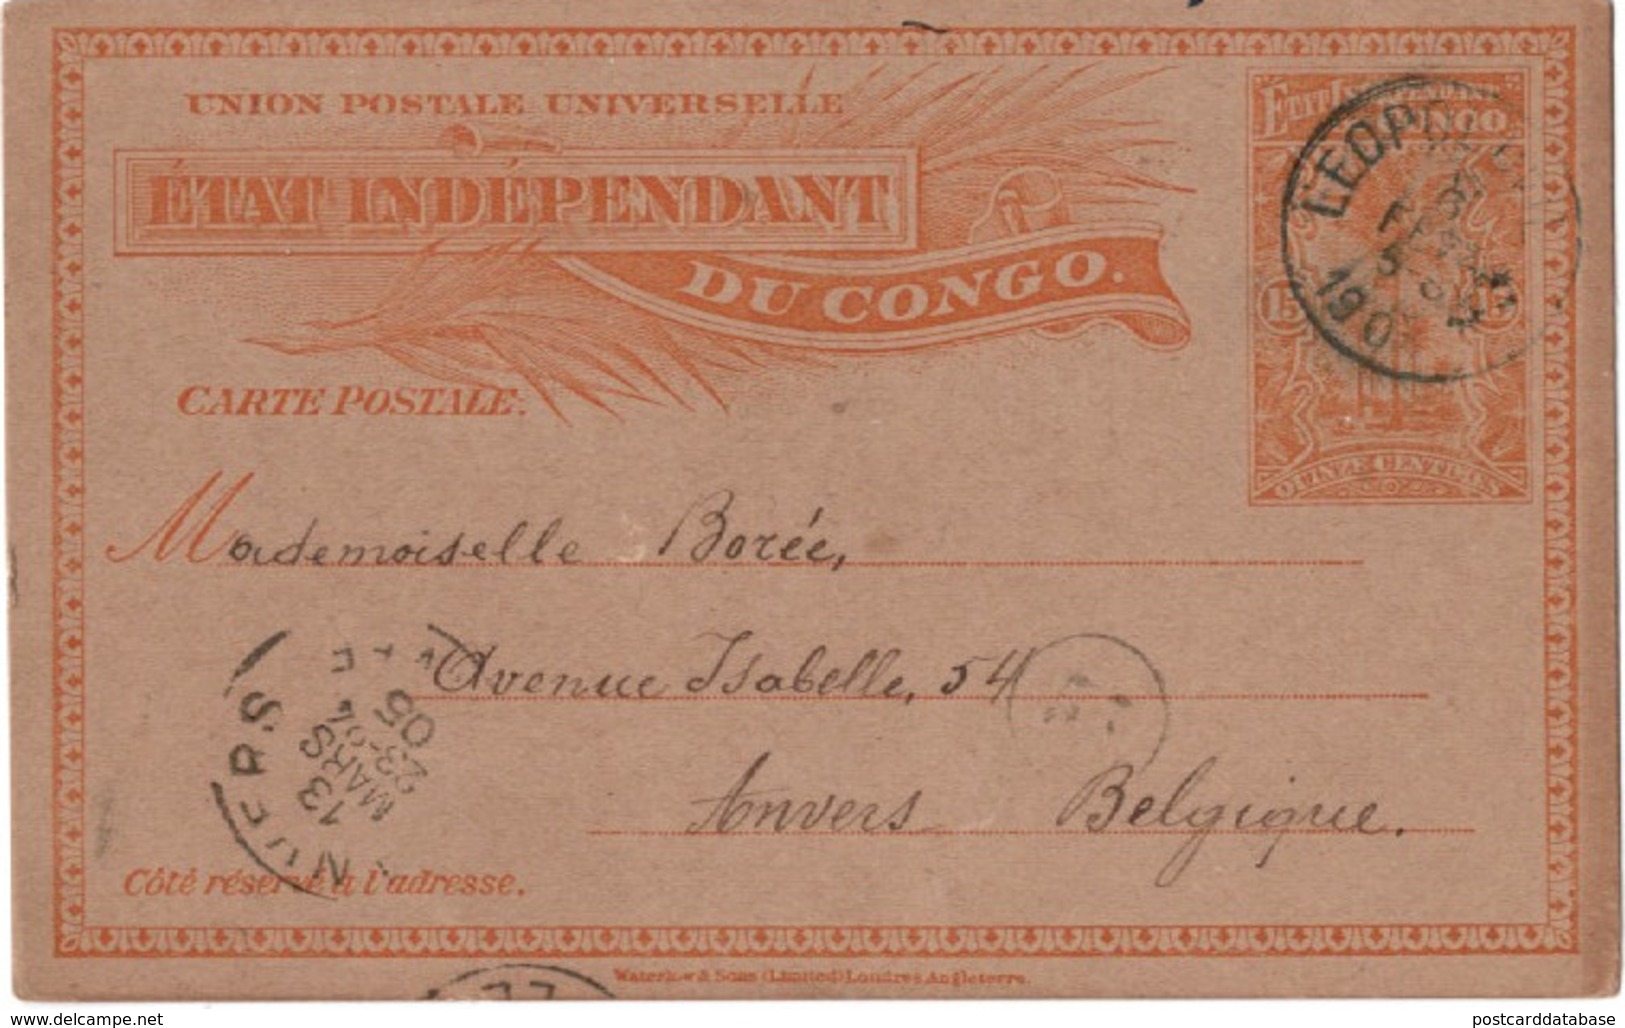 Stamped Stationery - Congo - Leopoldville 1905 - Entiers Postaux